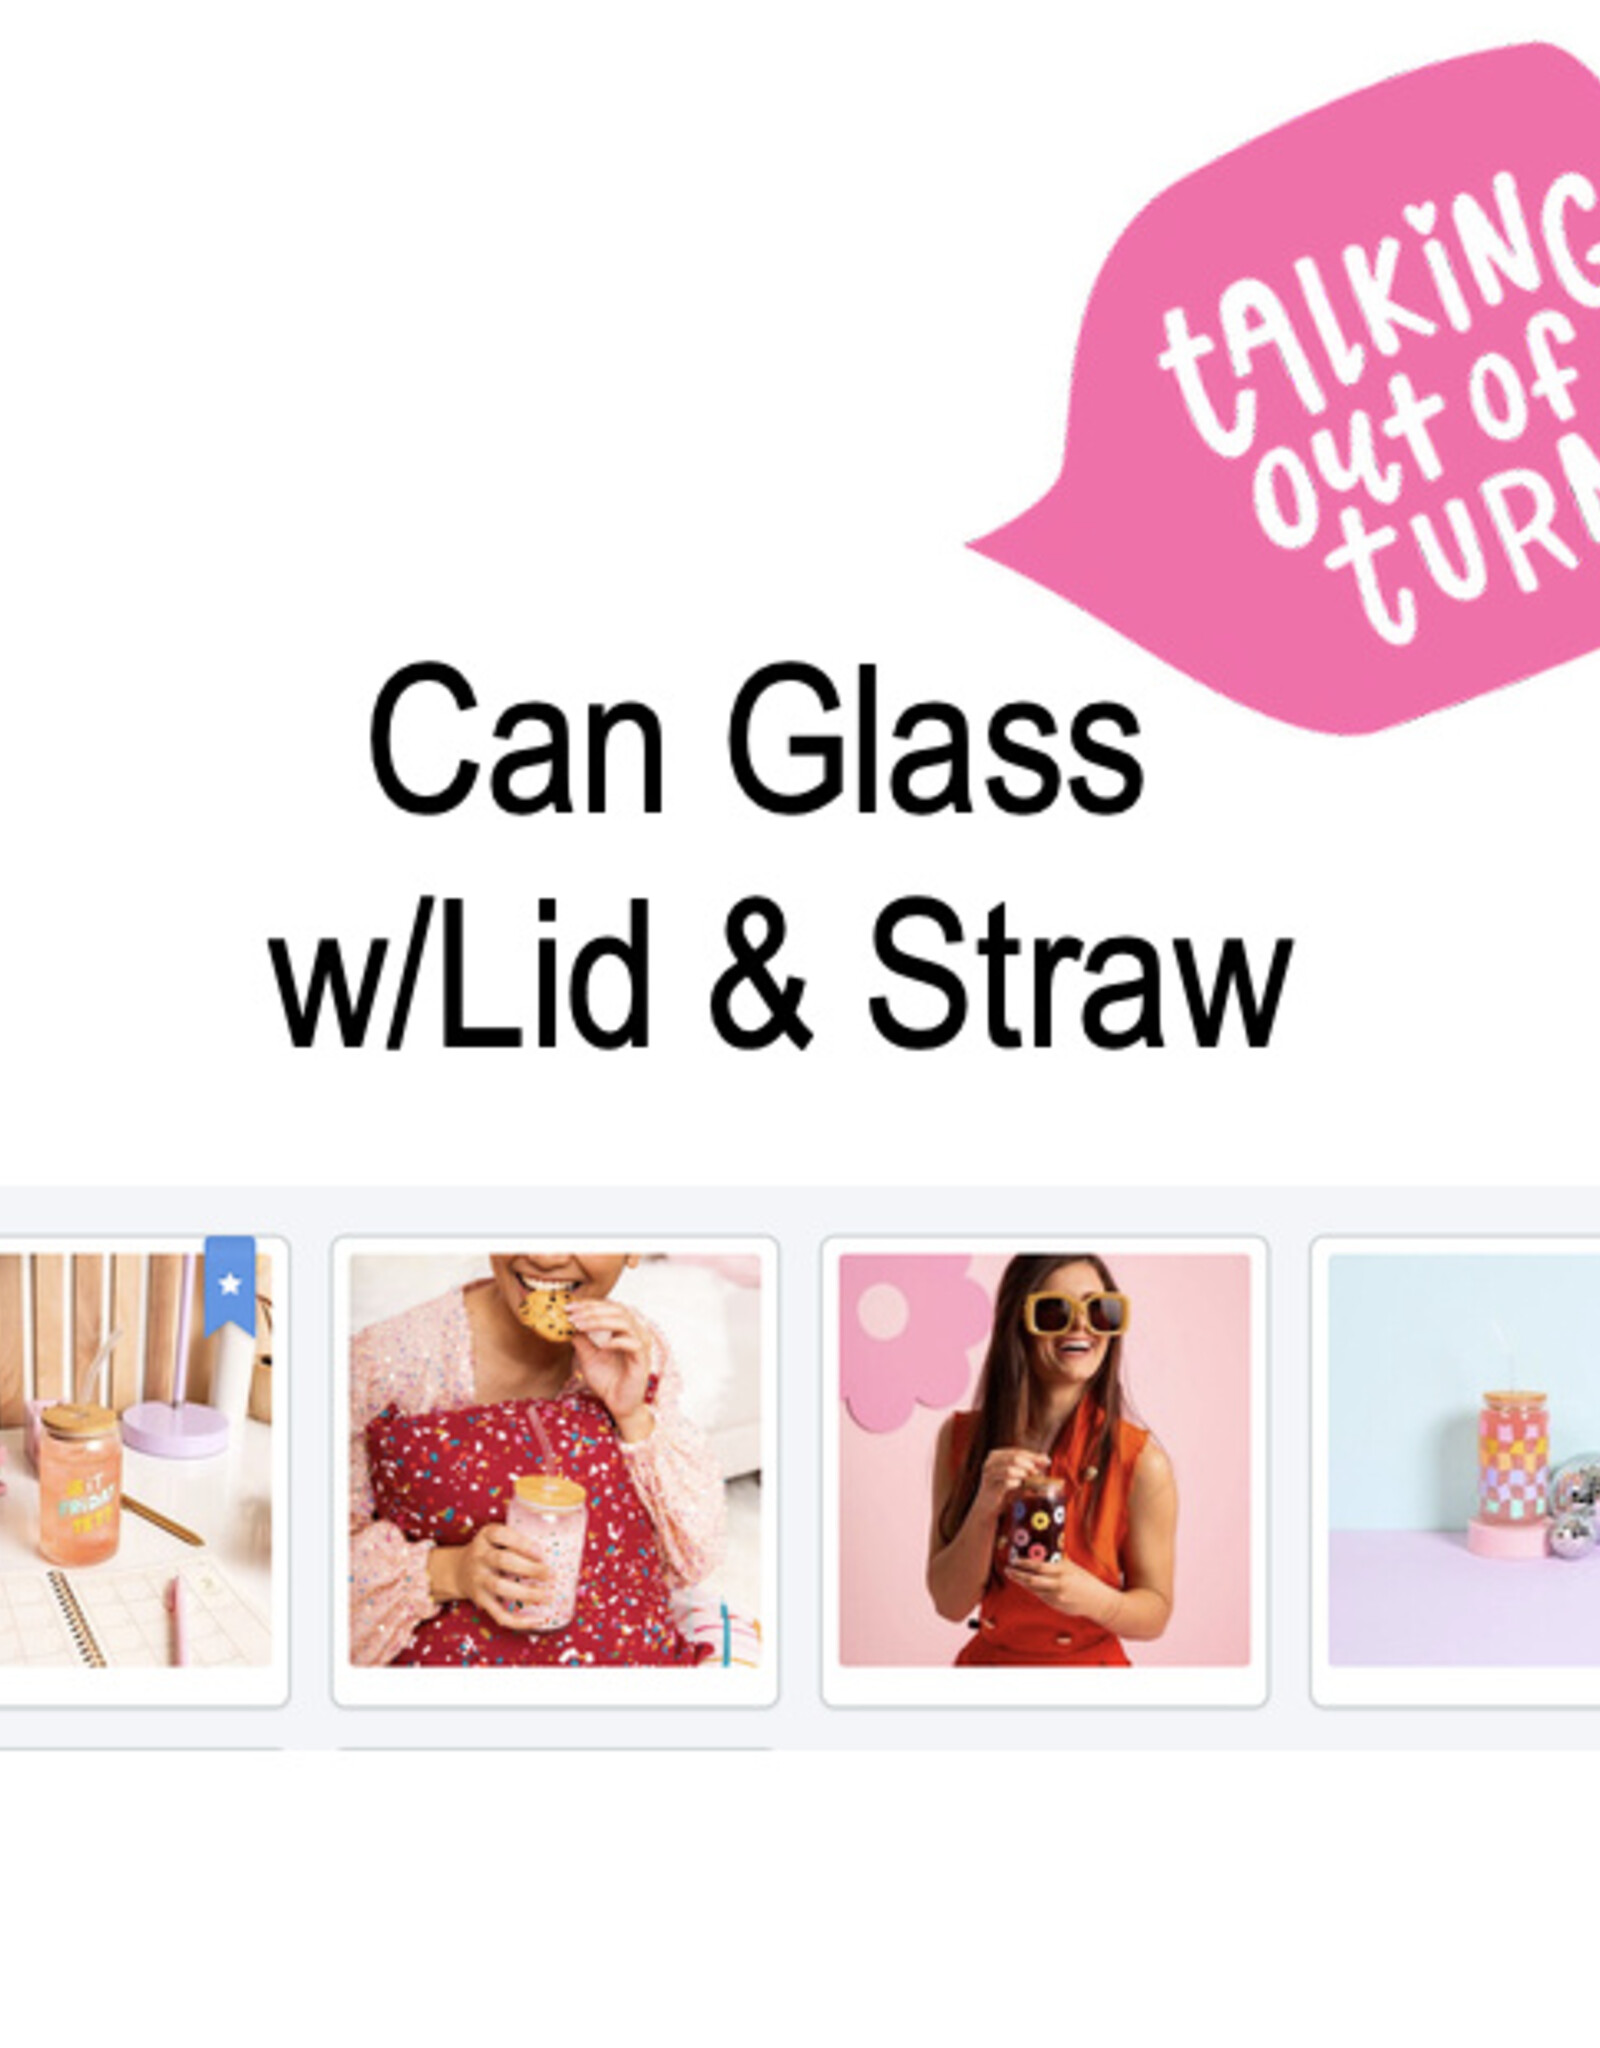 Can Glass w/ Lid + Straw– Talking Out Of Turn